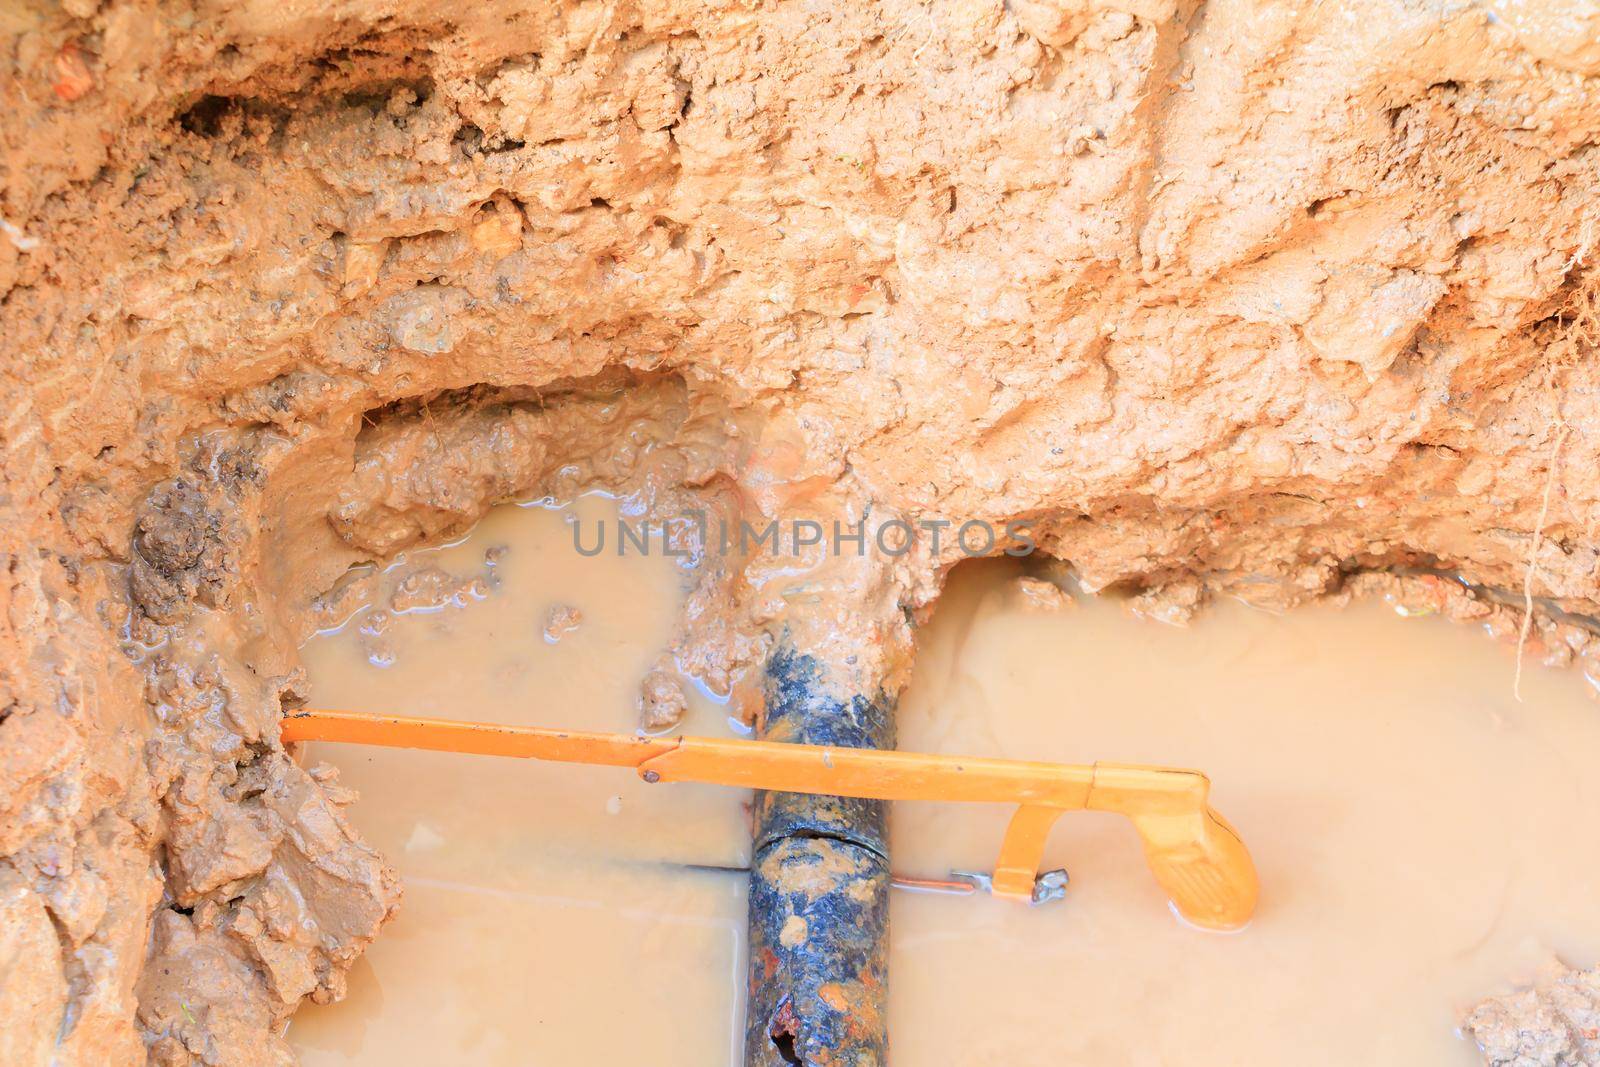 repair broken pipe in hole with plumbing water flow underground outdoor and sunlight with copy space add text